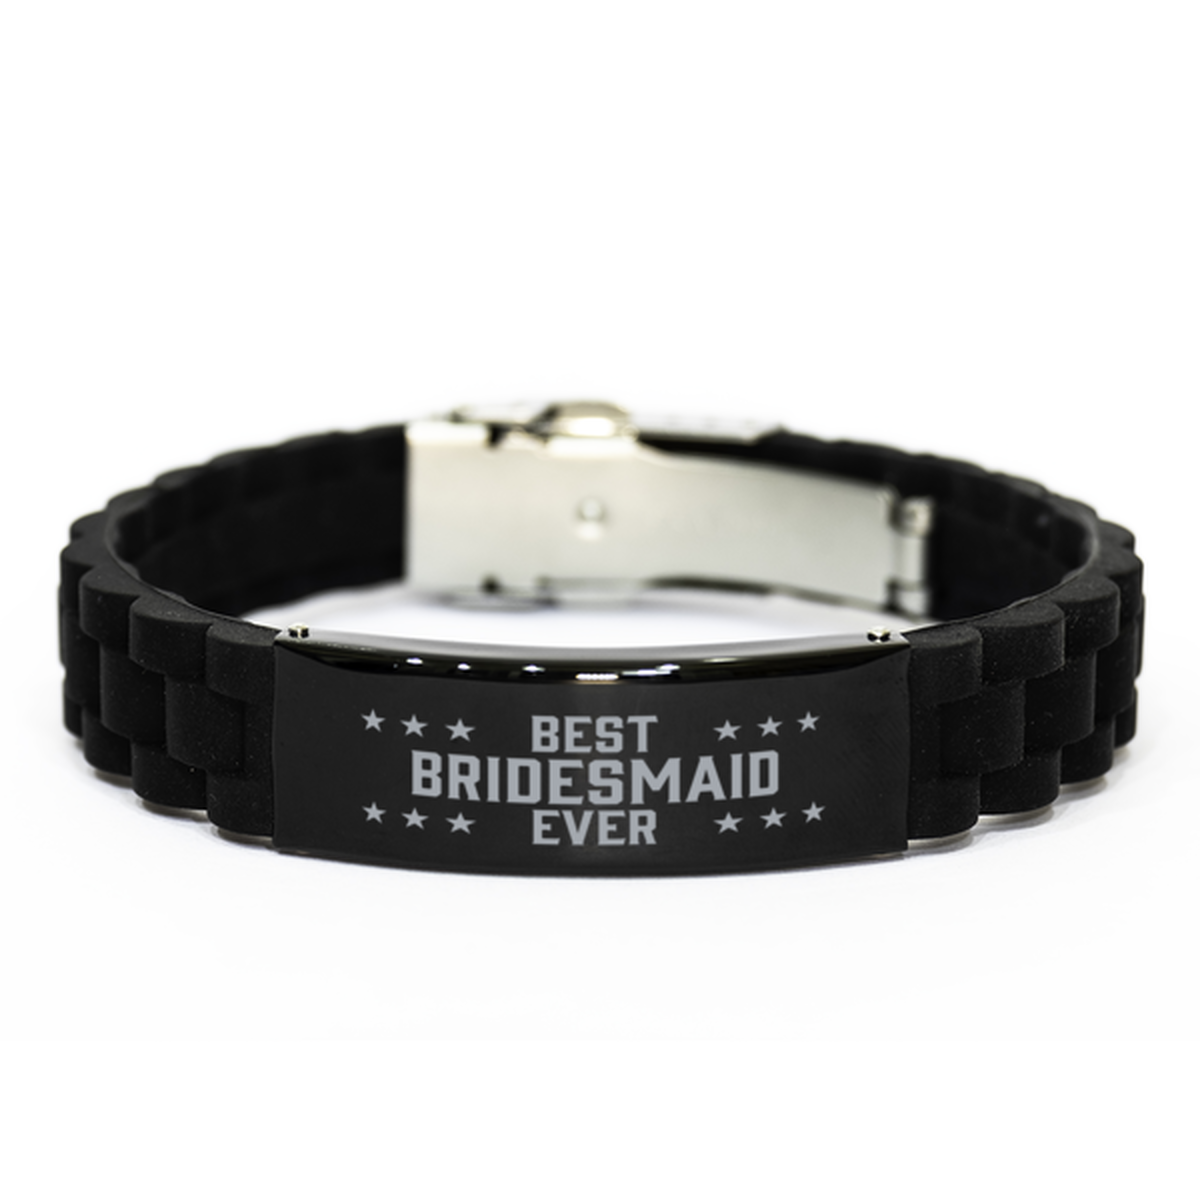 Best Bridemaid Ever Bridemaid Gifts, Funny Black Engraved Bracelet For Bridemaid, Family Gifts For Women